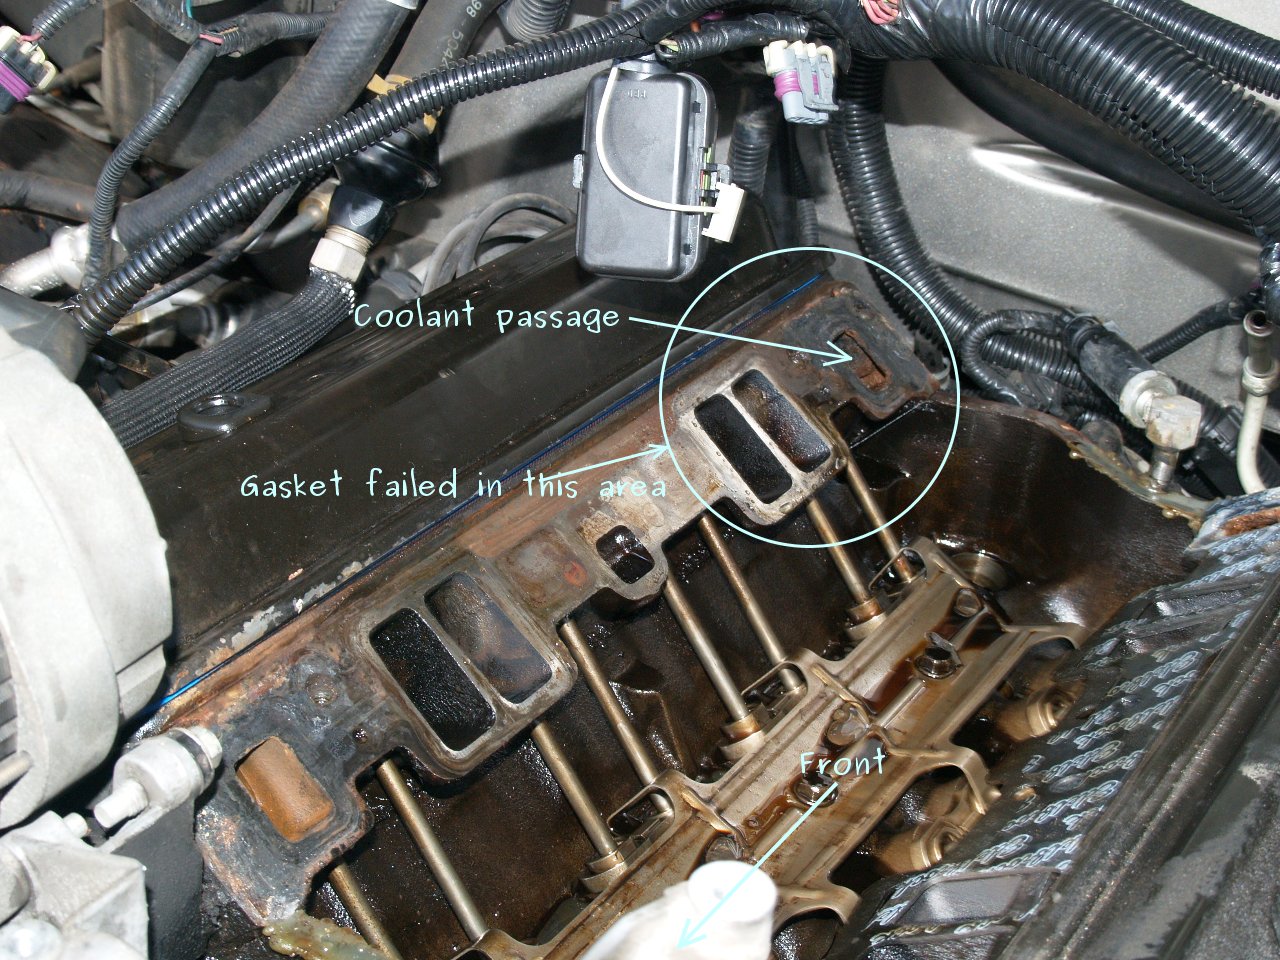 See P0870 in engine